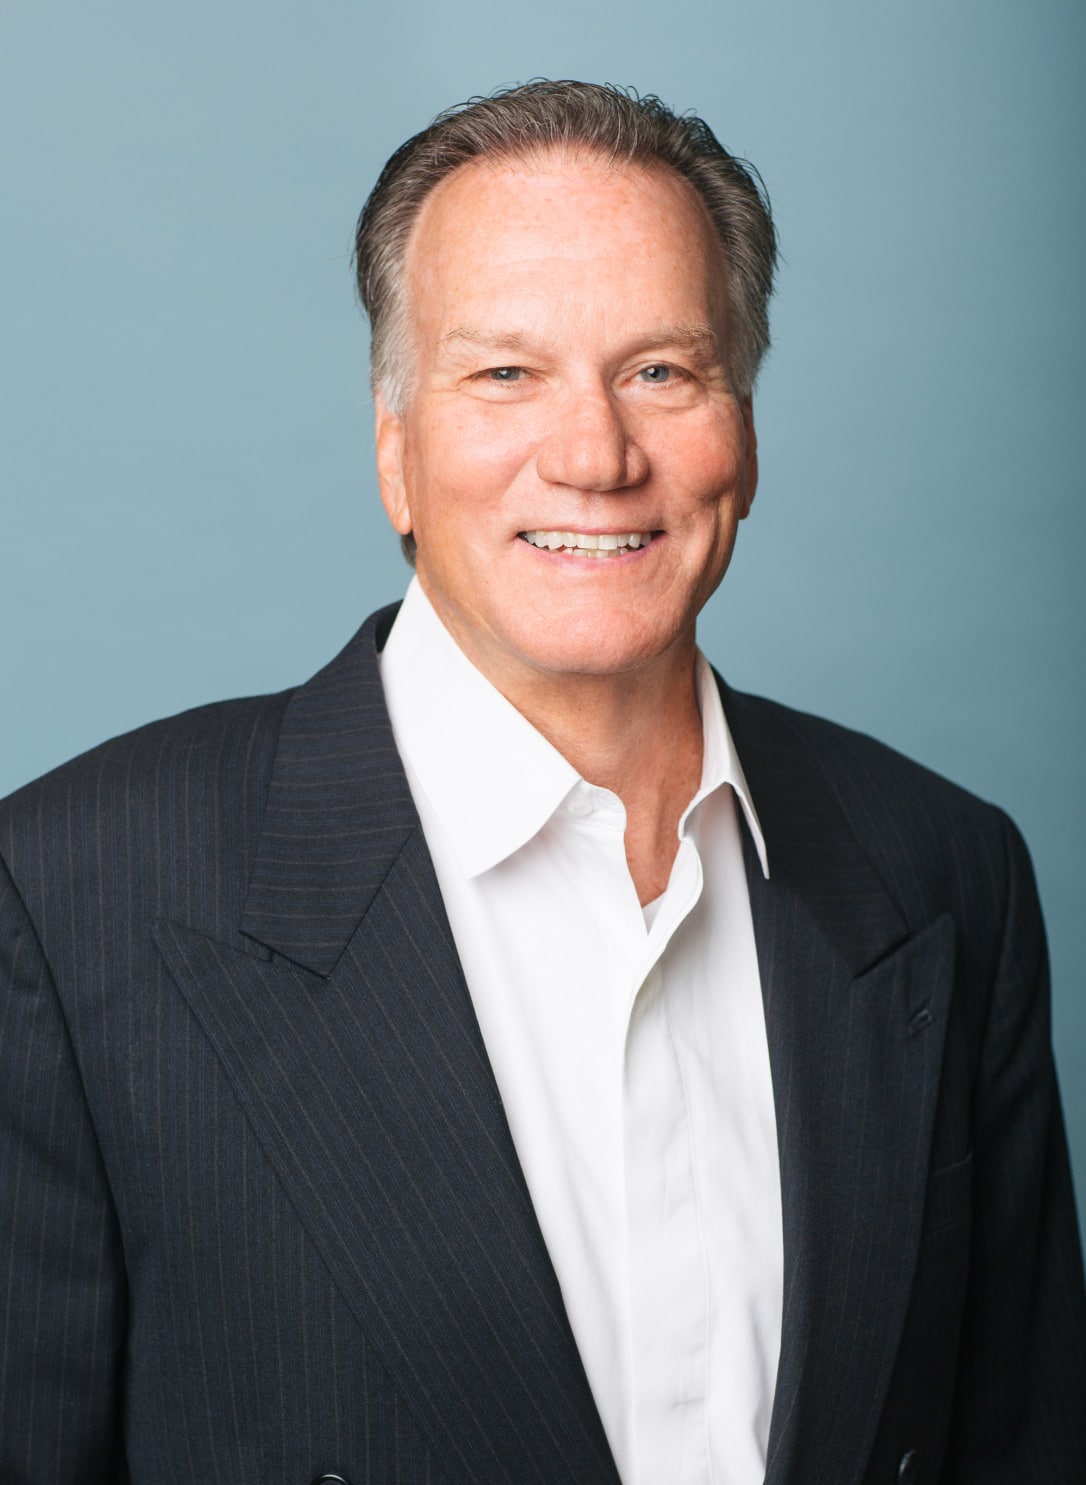 Phil Seibel, Founder of Advanced Benefit Solutions